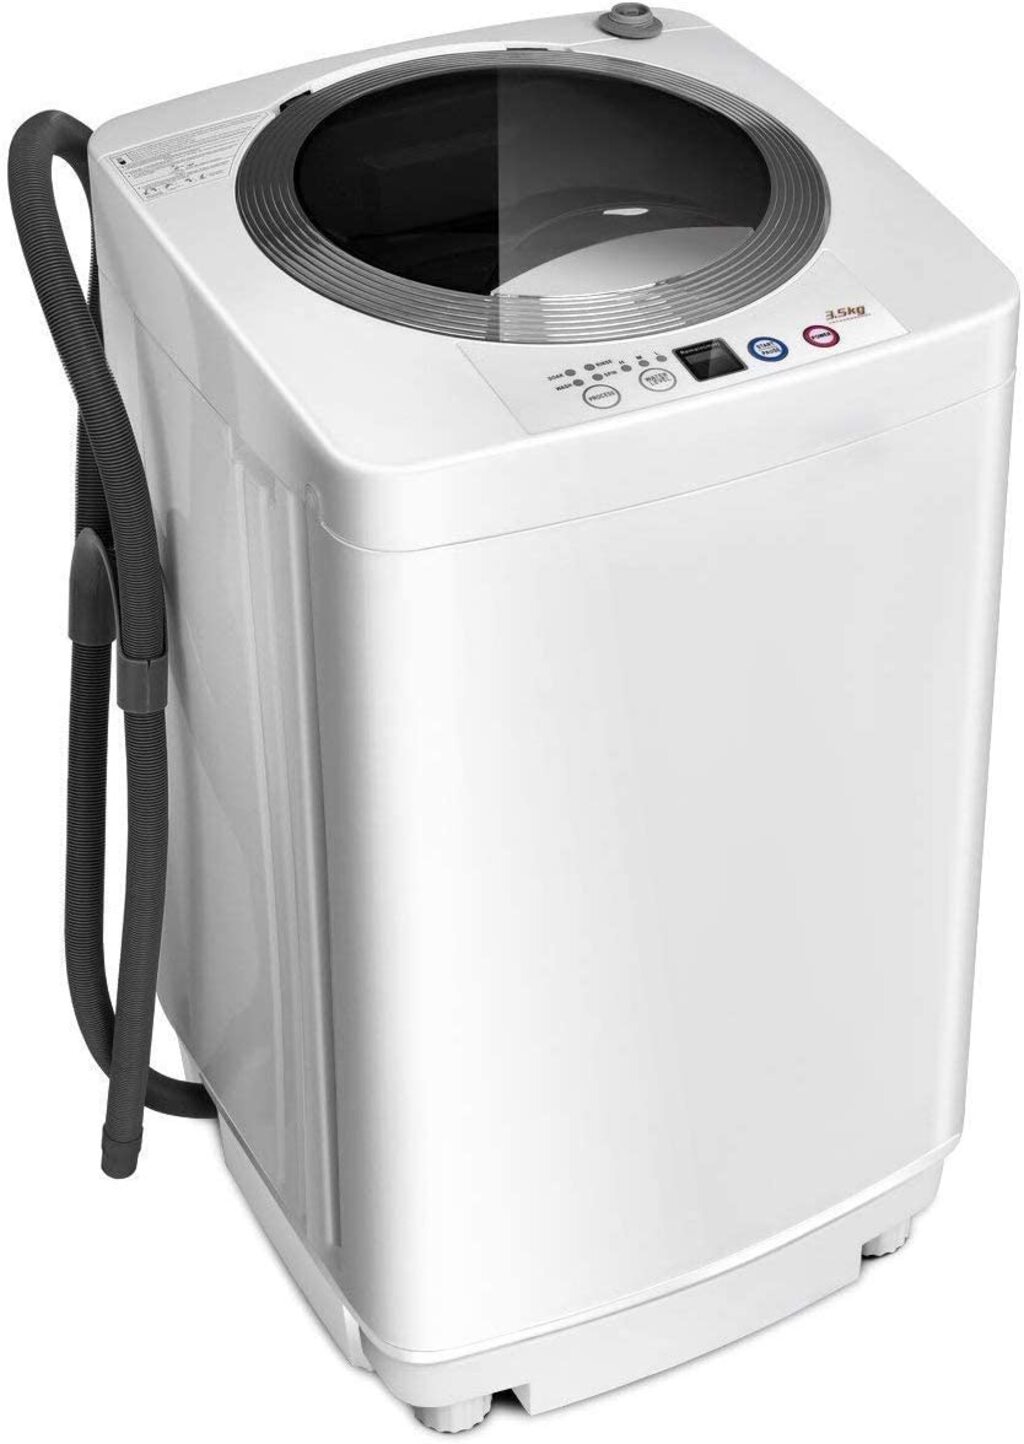 stackable washer and dryer